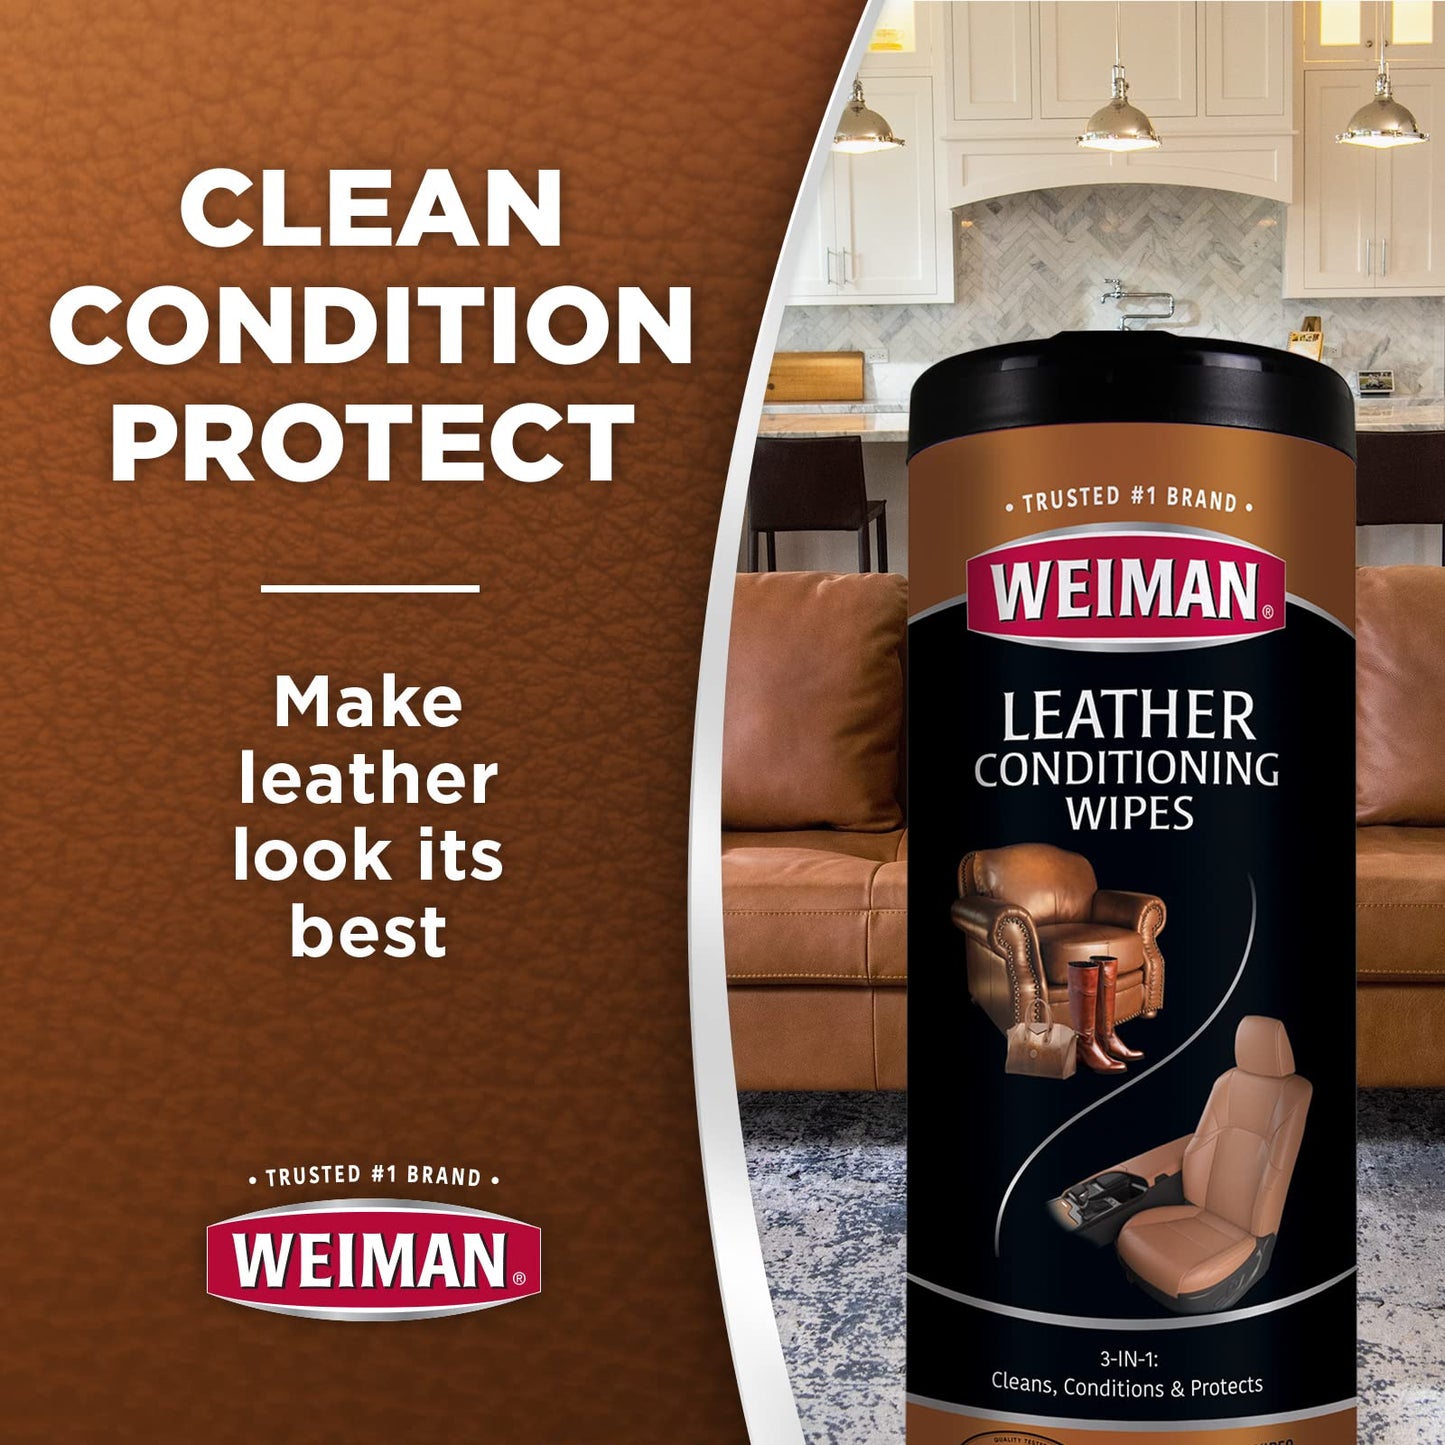 Weiman Stainless Steel Wipes and Leather Wipes - Clean and Polish Appliances for a Brighter and Longer Shine - Clean, Condition and Restore Leather Surfaces - Packaging May Vary